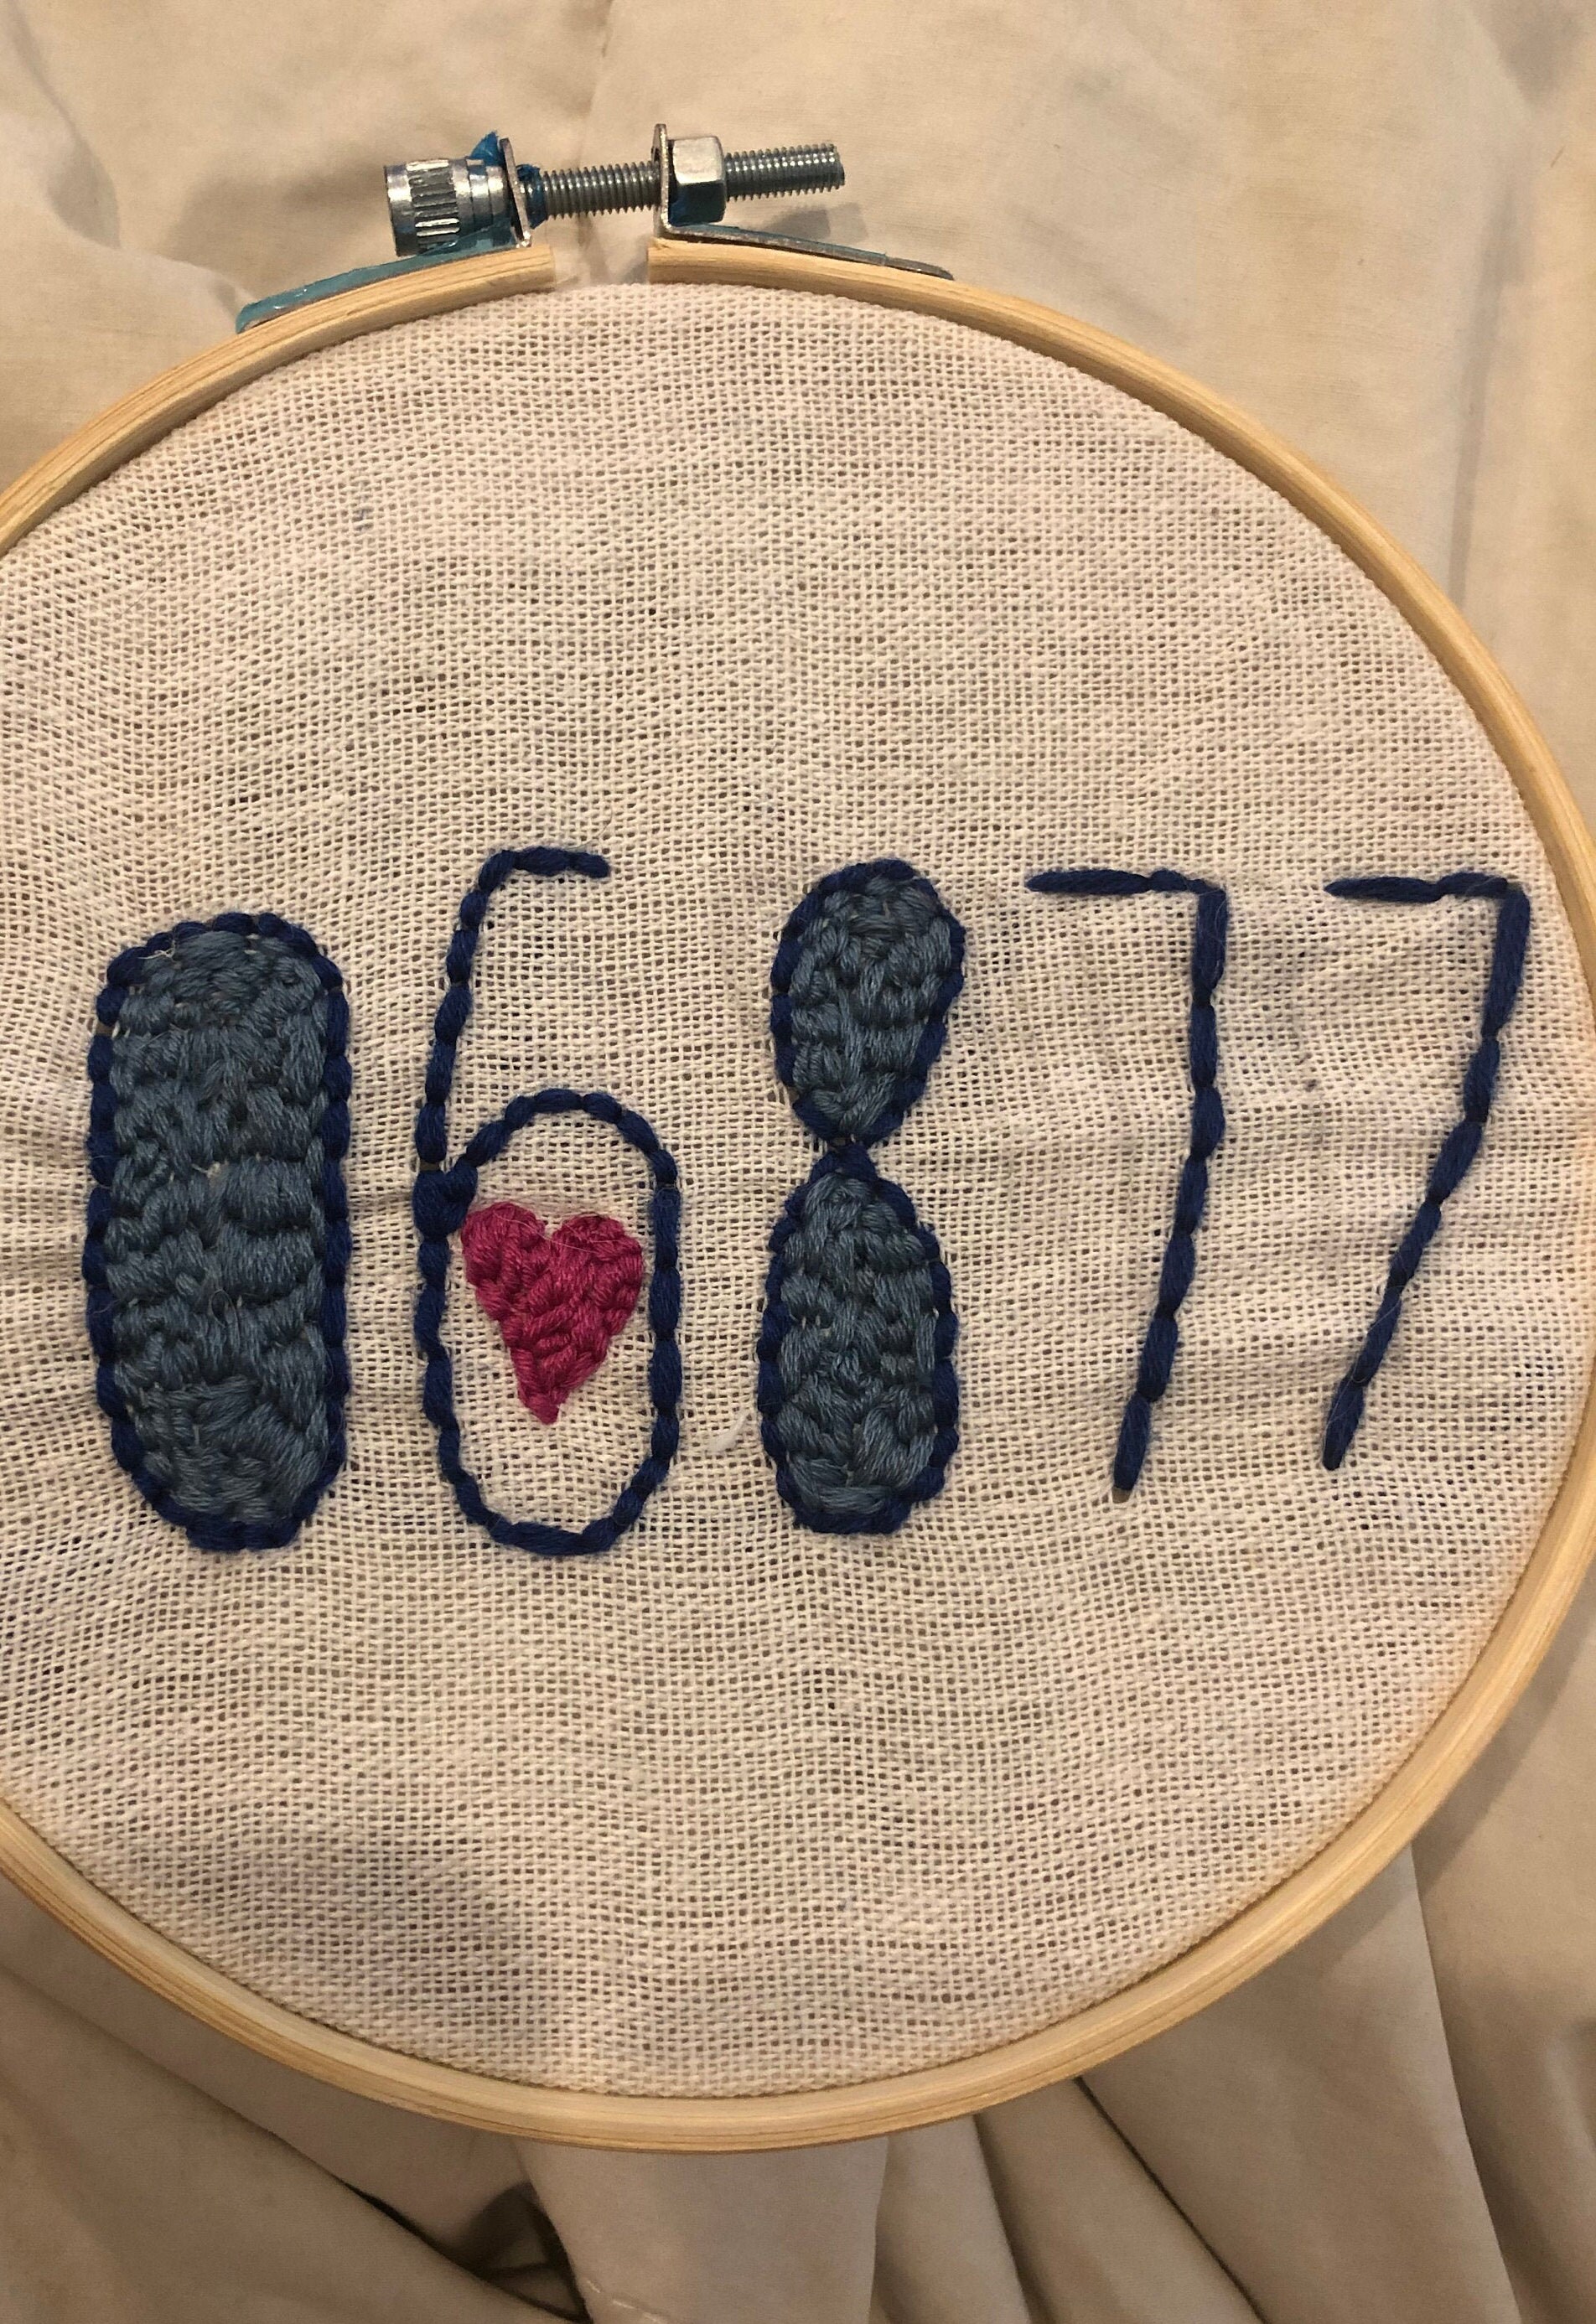 06877 Ridgefield CT Hand Embroidery in Hoop pic